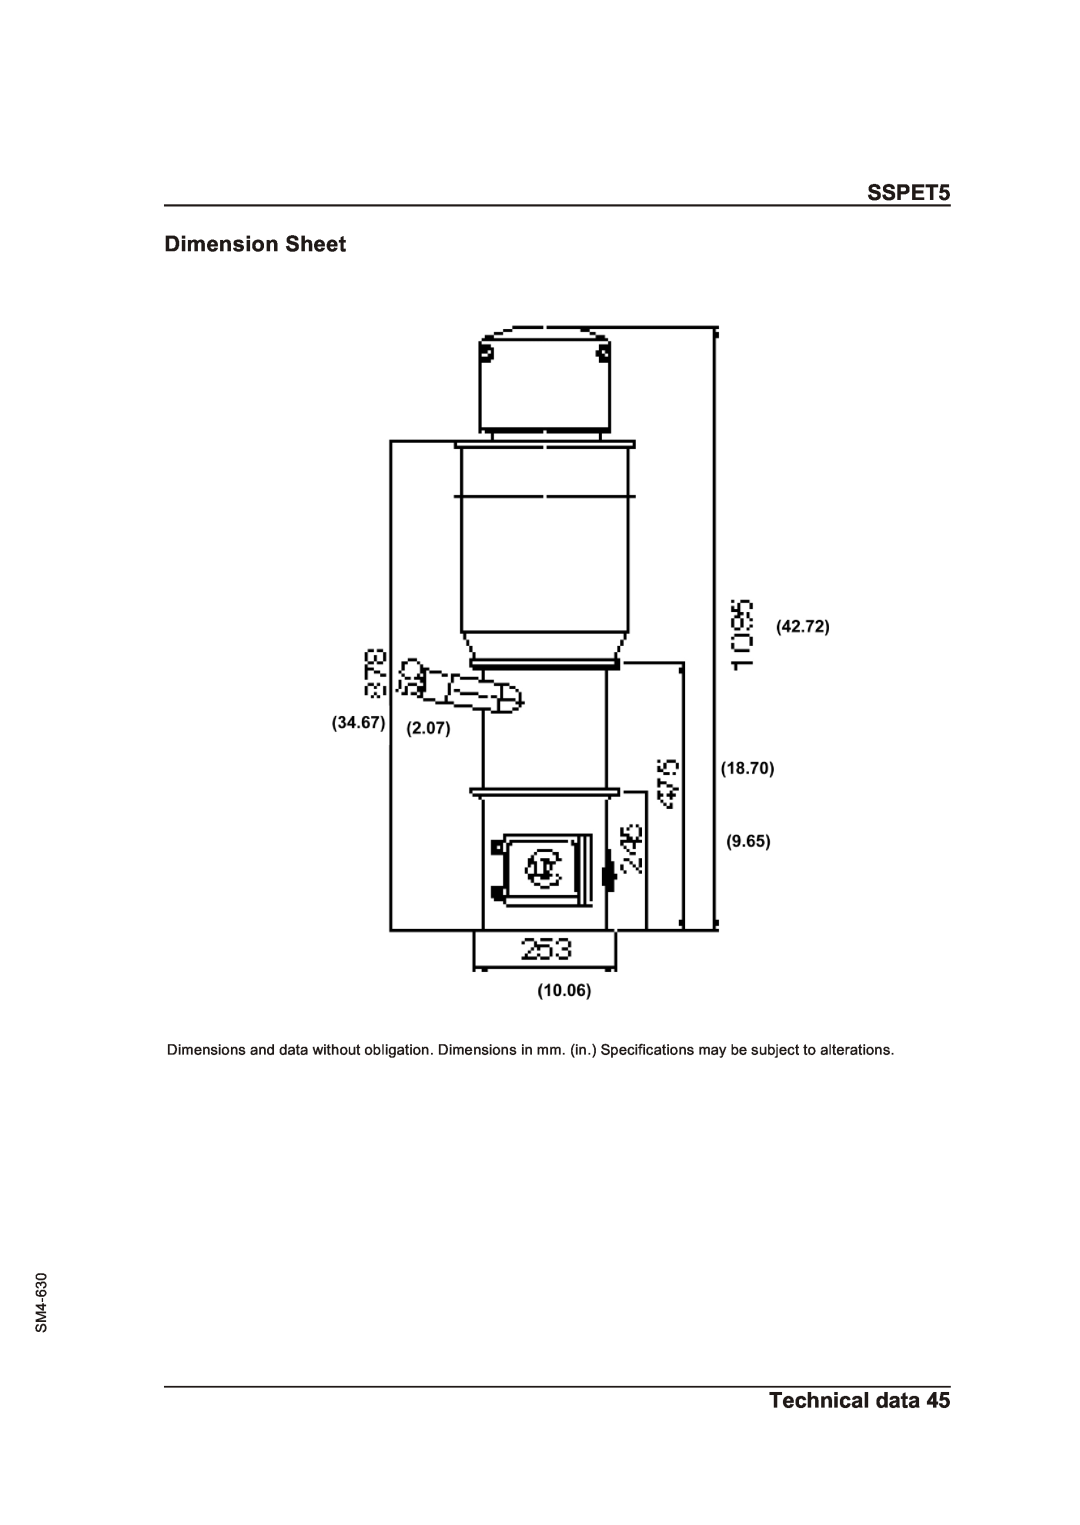 Sterling SSPET 5 operating instructions SSPET5 Dimension Sheet, Technical data, SM4-630 